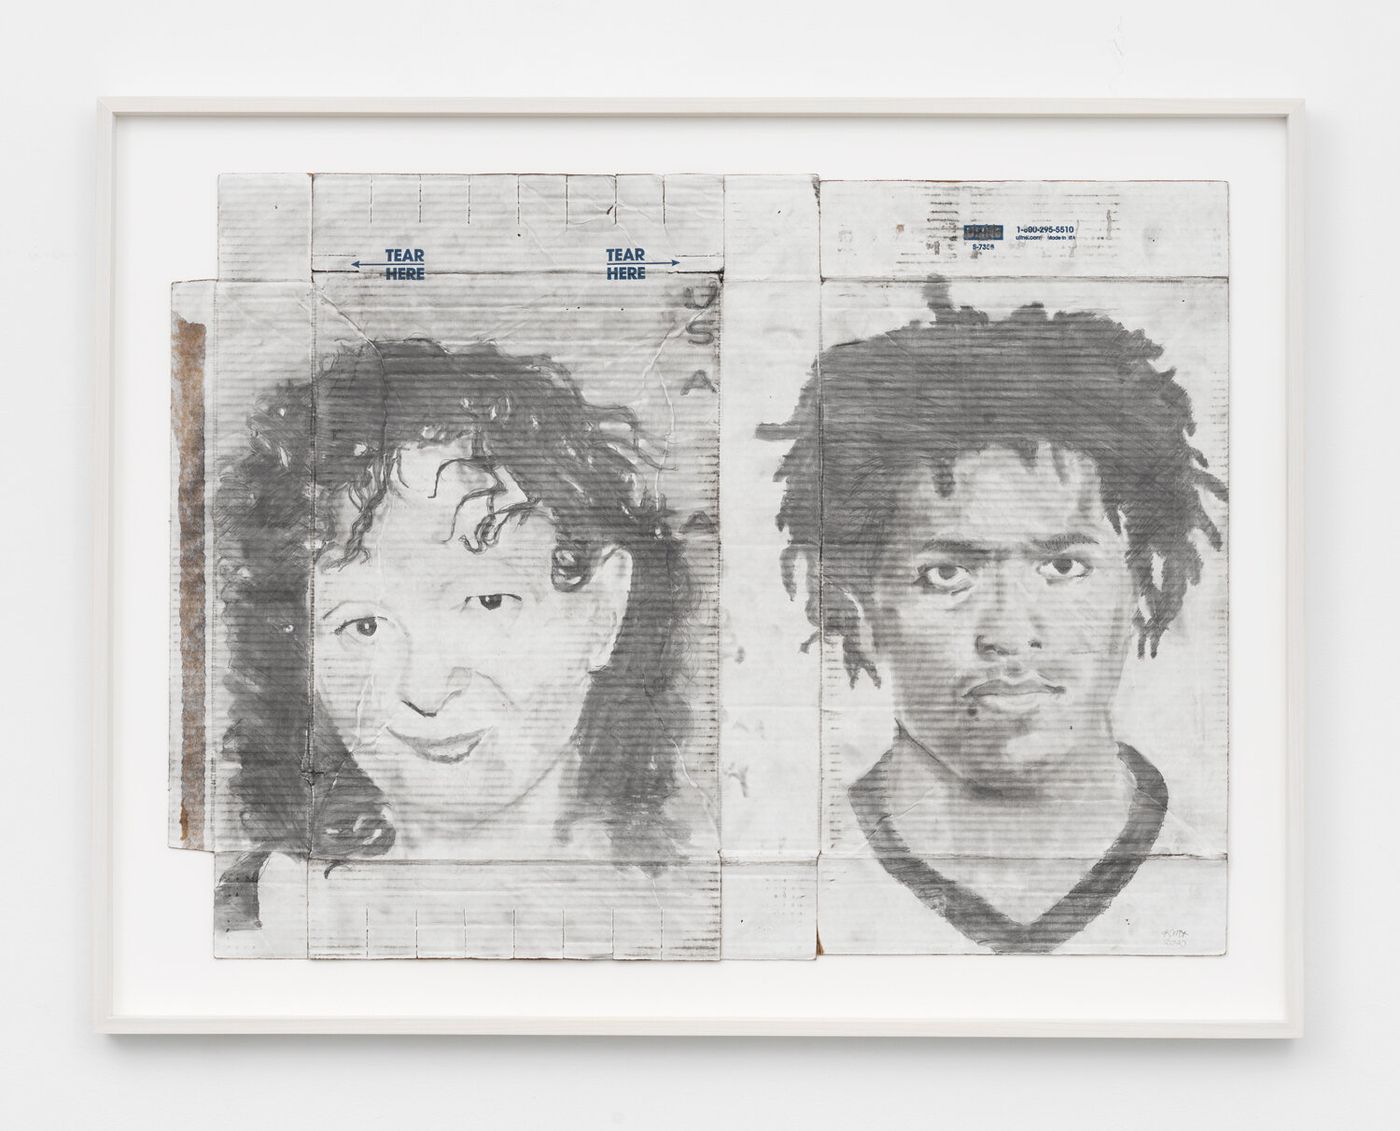 Image of NaN/Mike, 2019: Graphite on found white cardboard